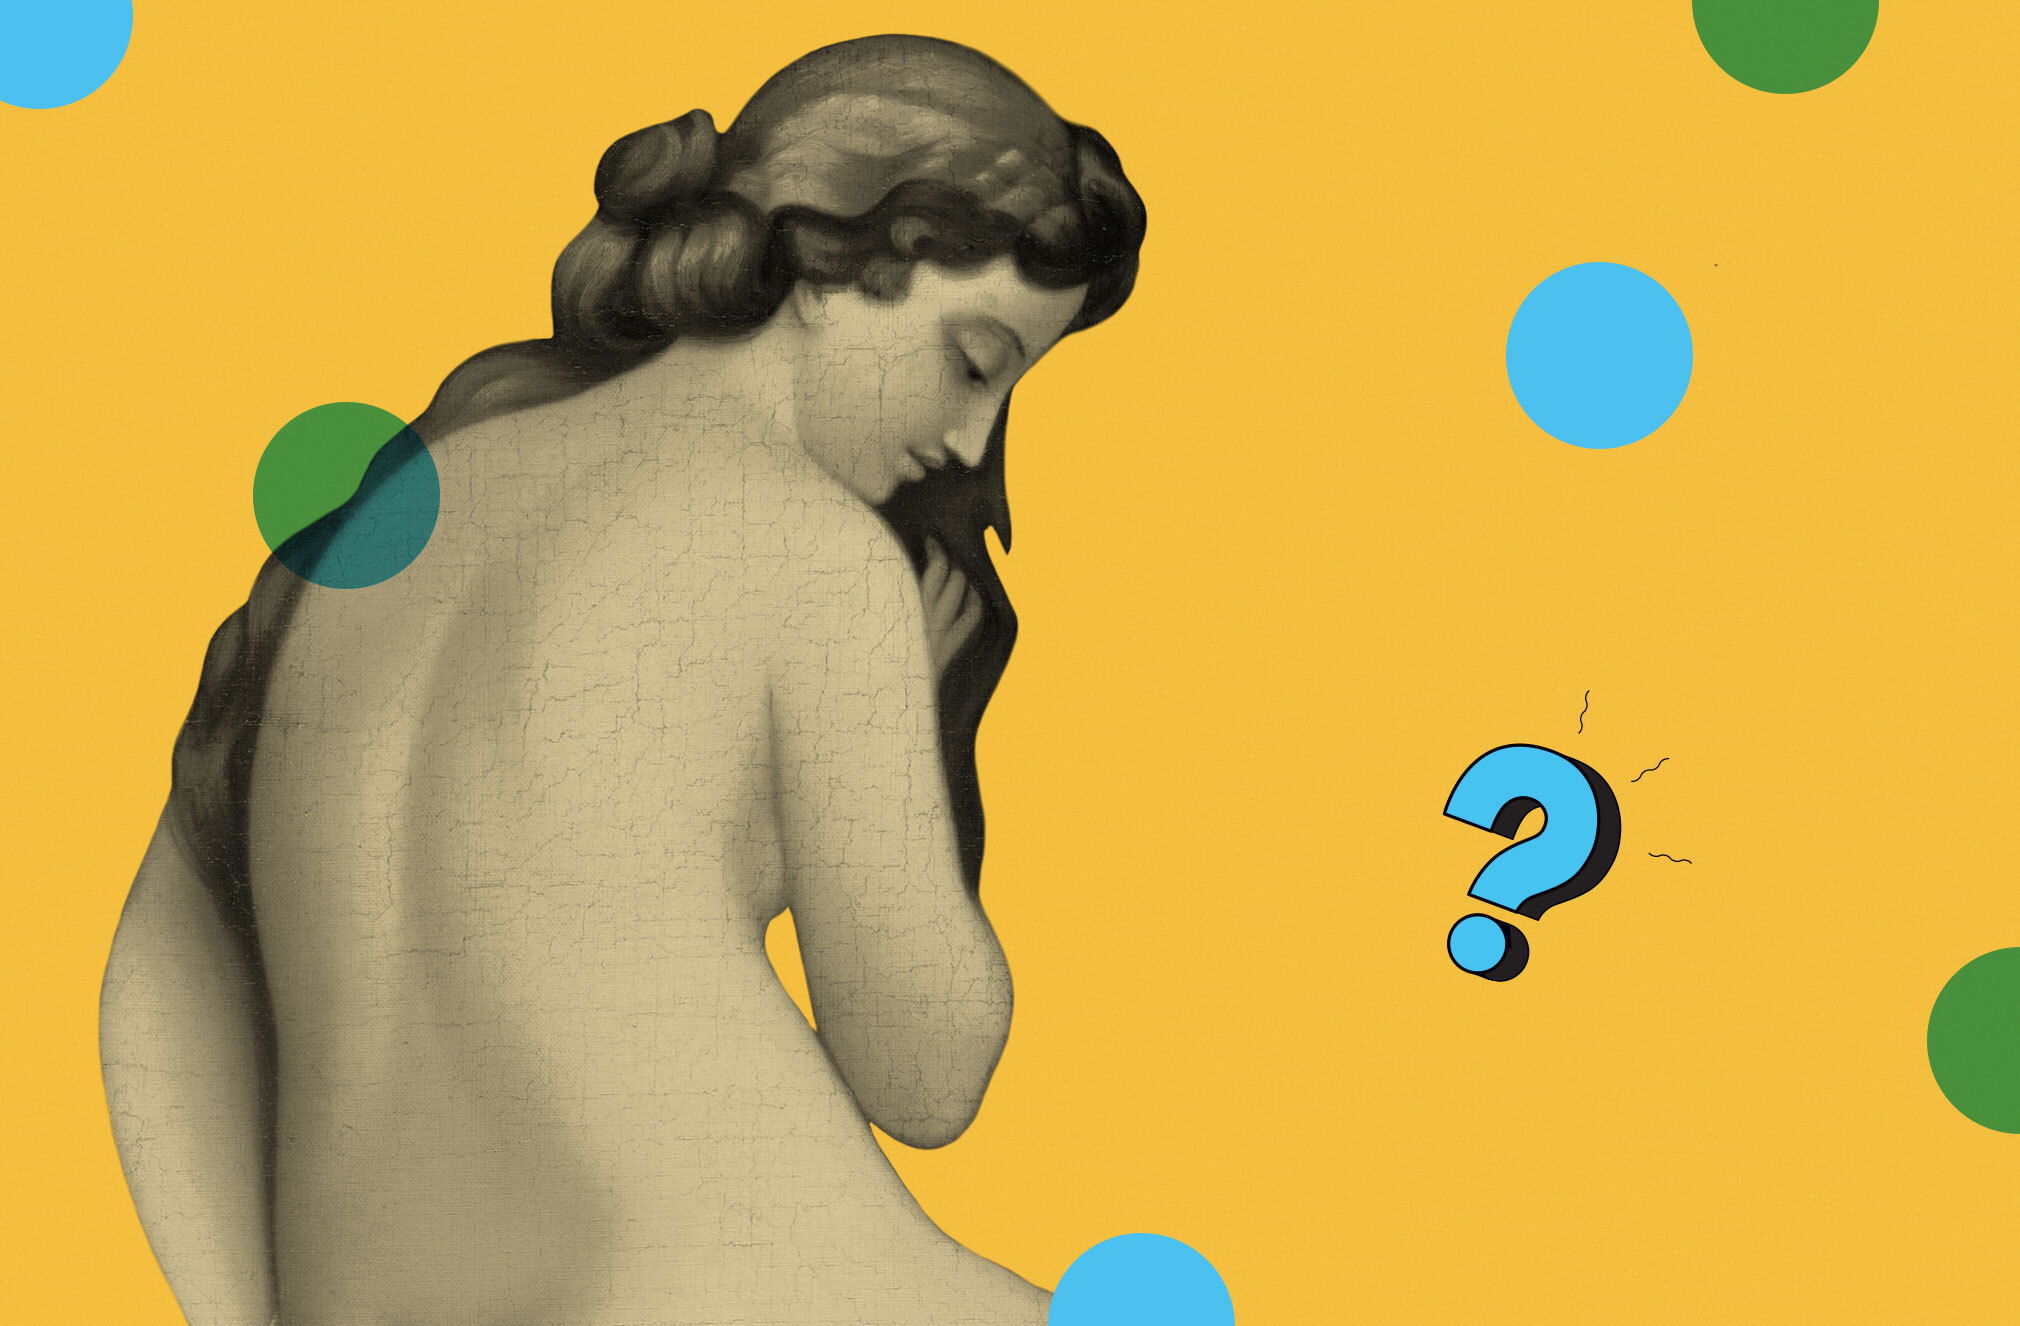 Vintage European Nudists - How can you safely send nudes? | Popular Science